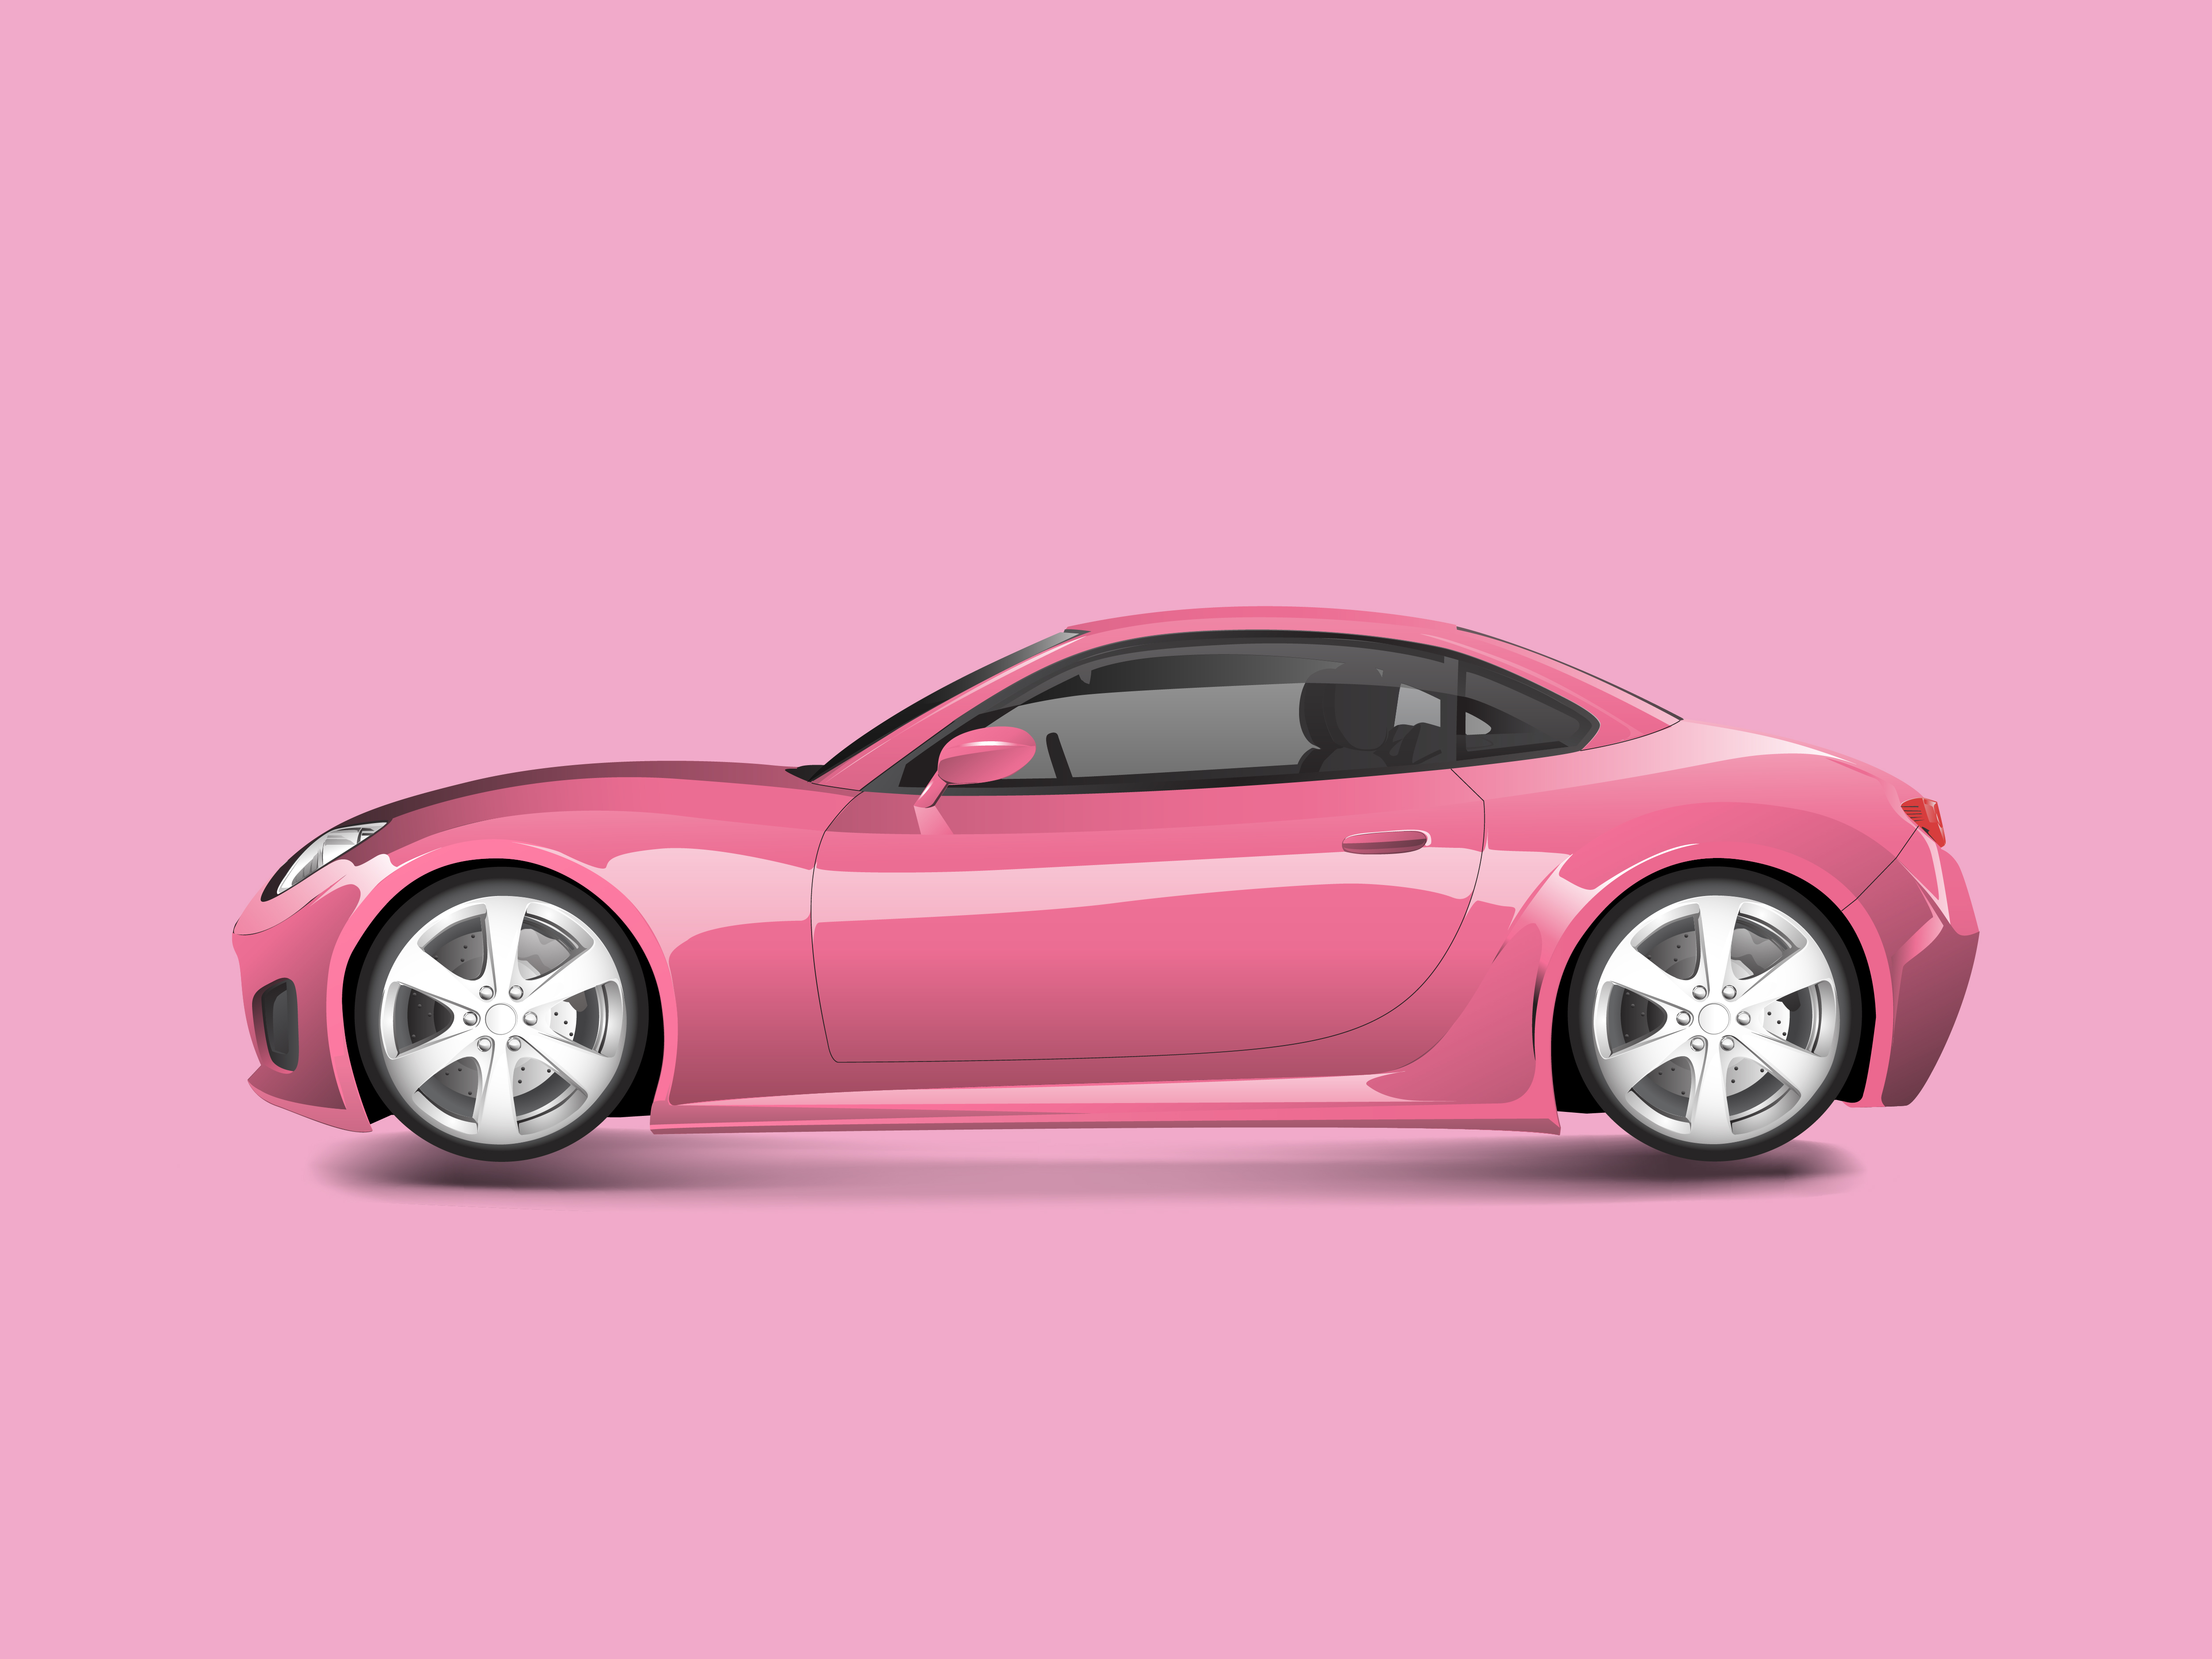 42 HQ Photos Pink Sports Car Clip Art / Pink cartoon sport car side view Royalty Free Vector Image